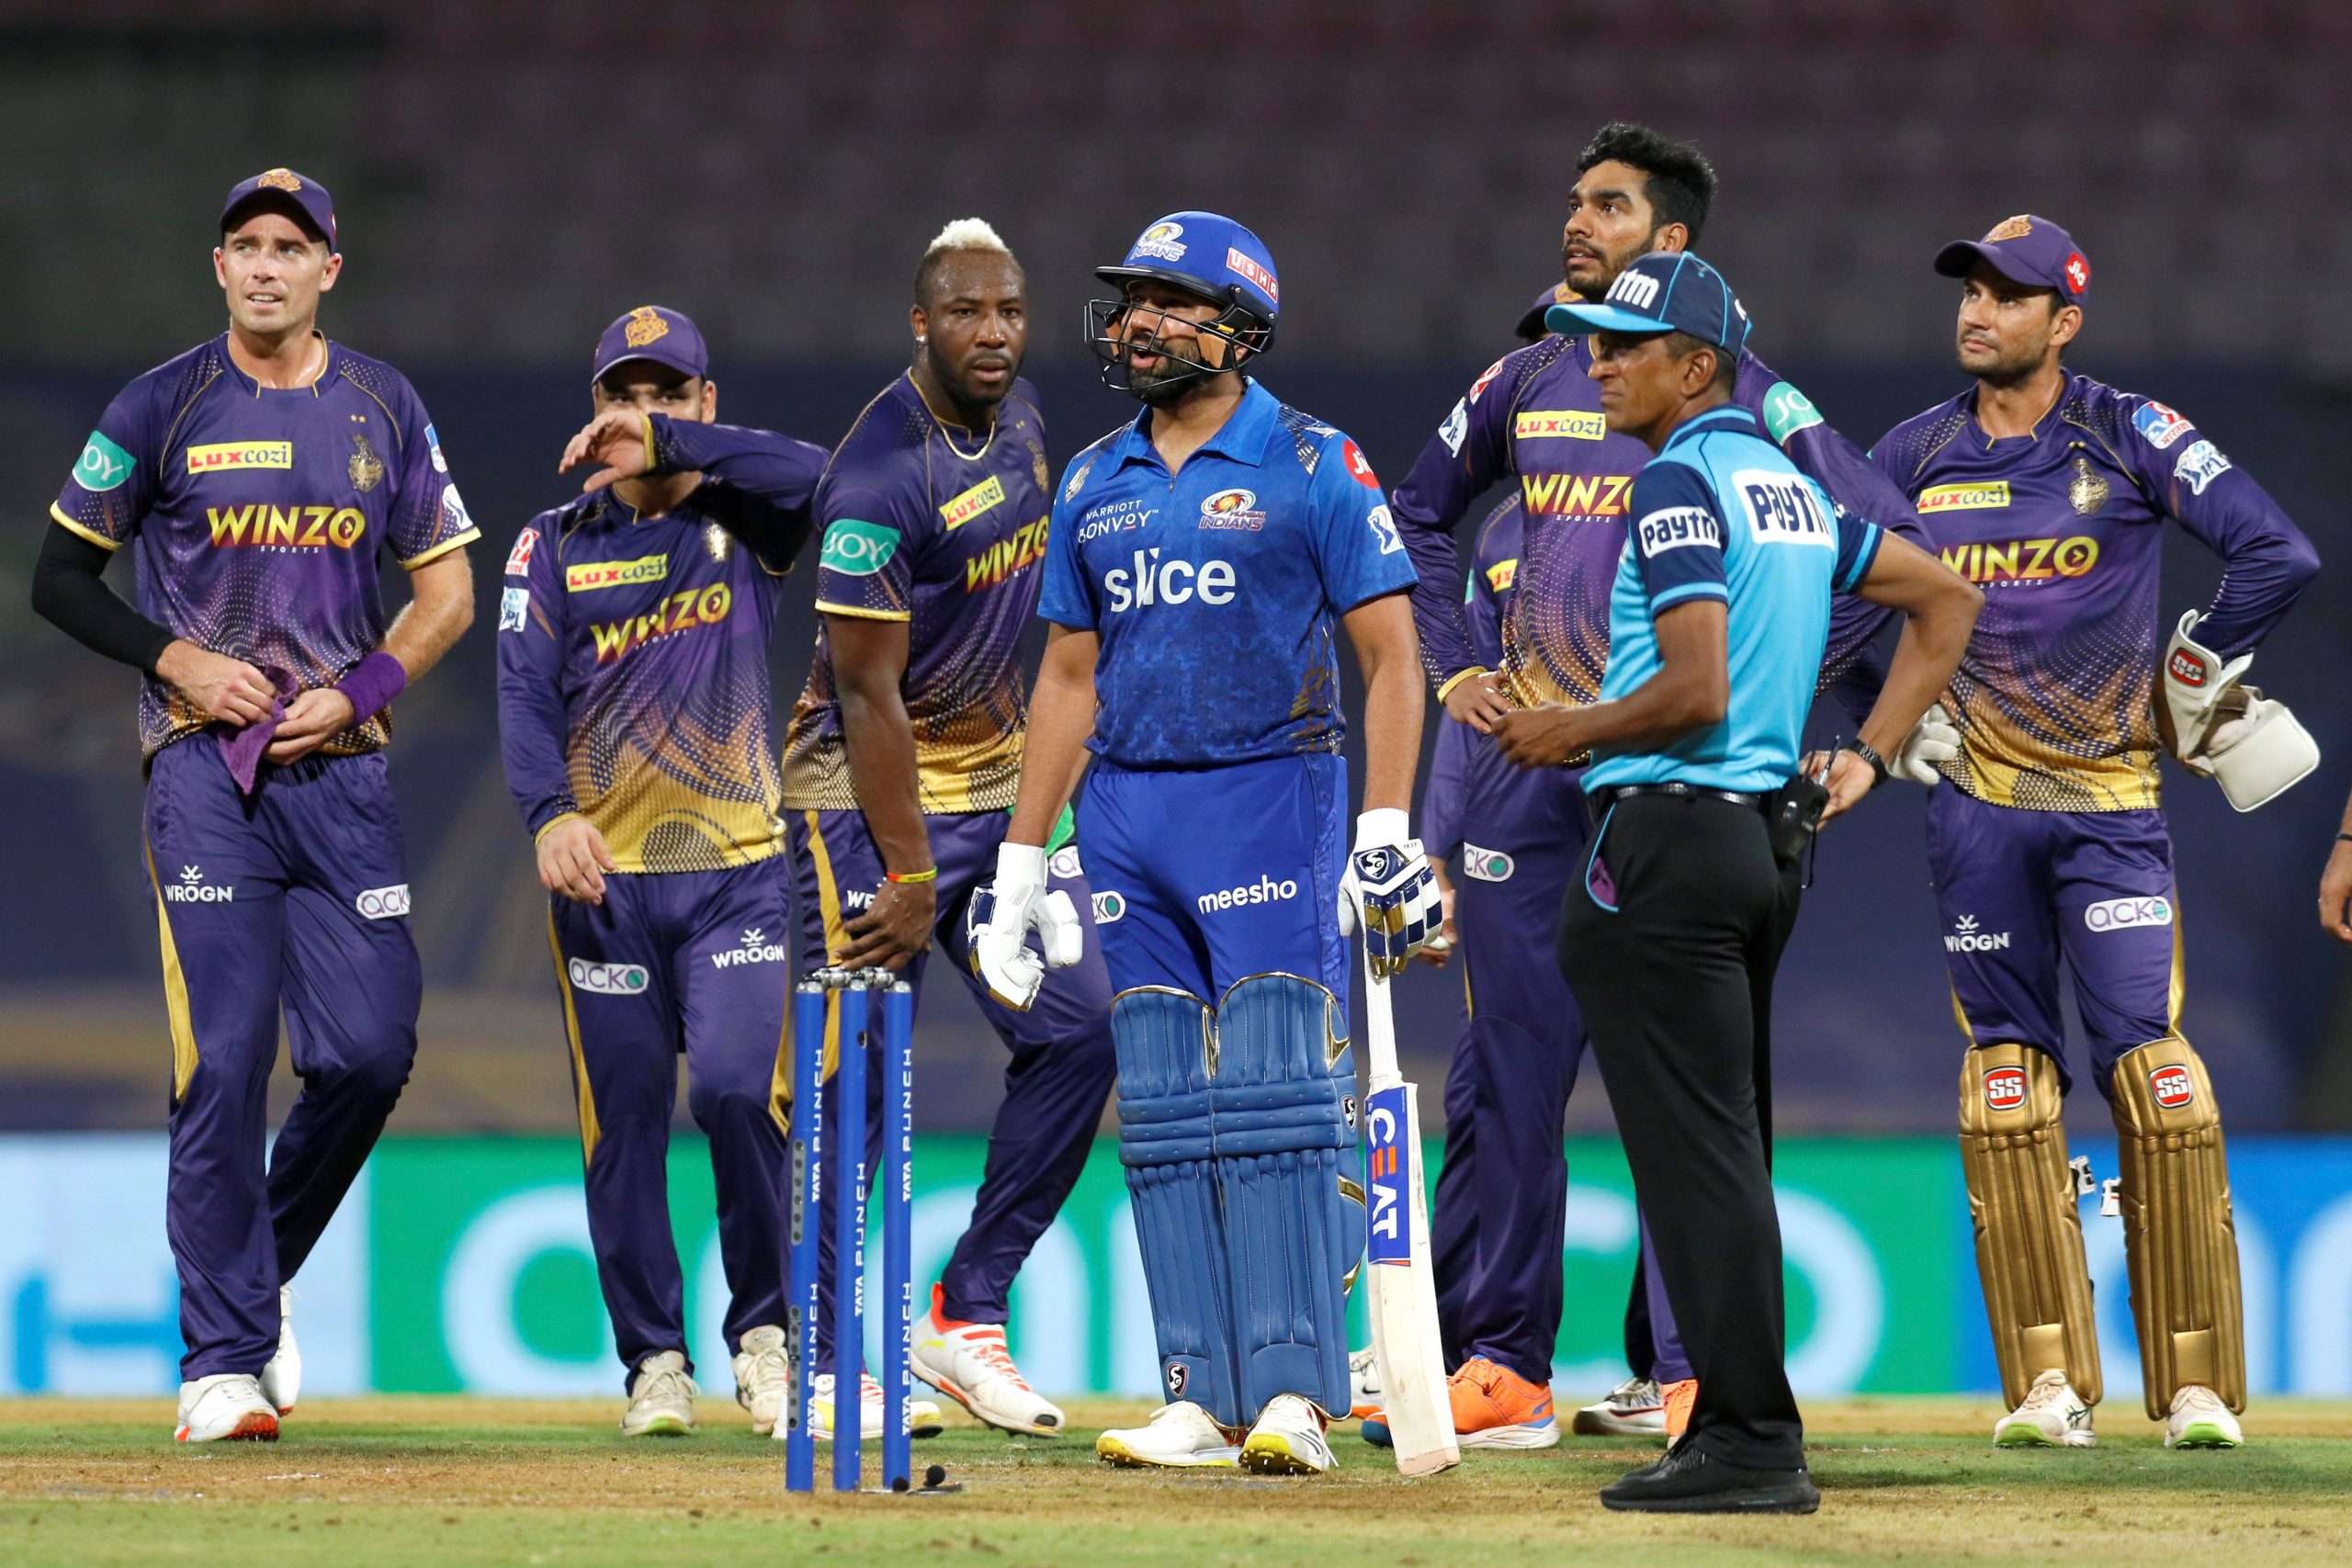 Out or not? Rohit Sharma’s dismissal vs Kolkata Knight Riders has everyone’s attention